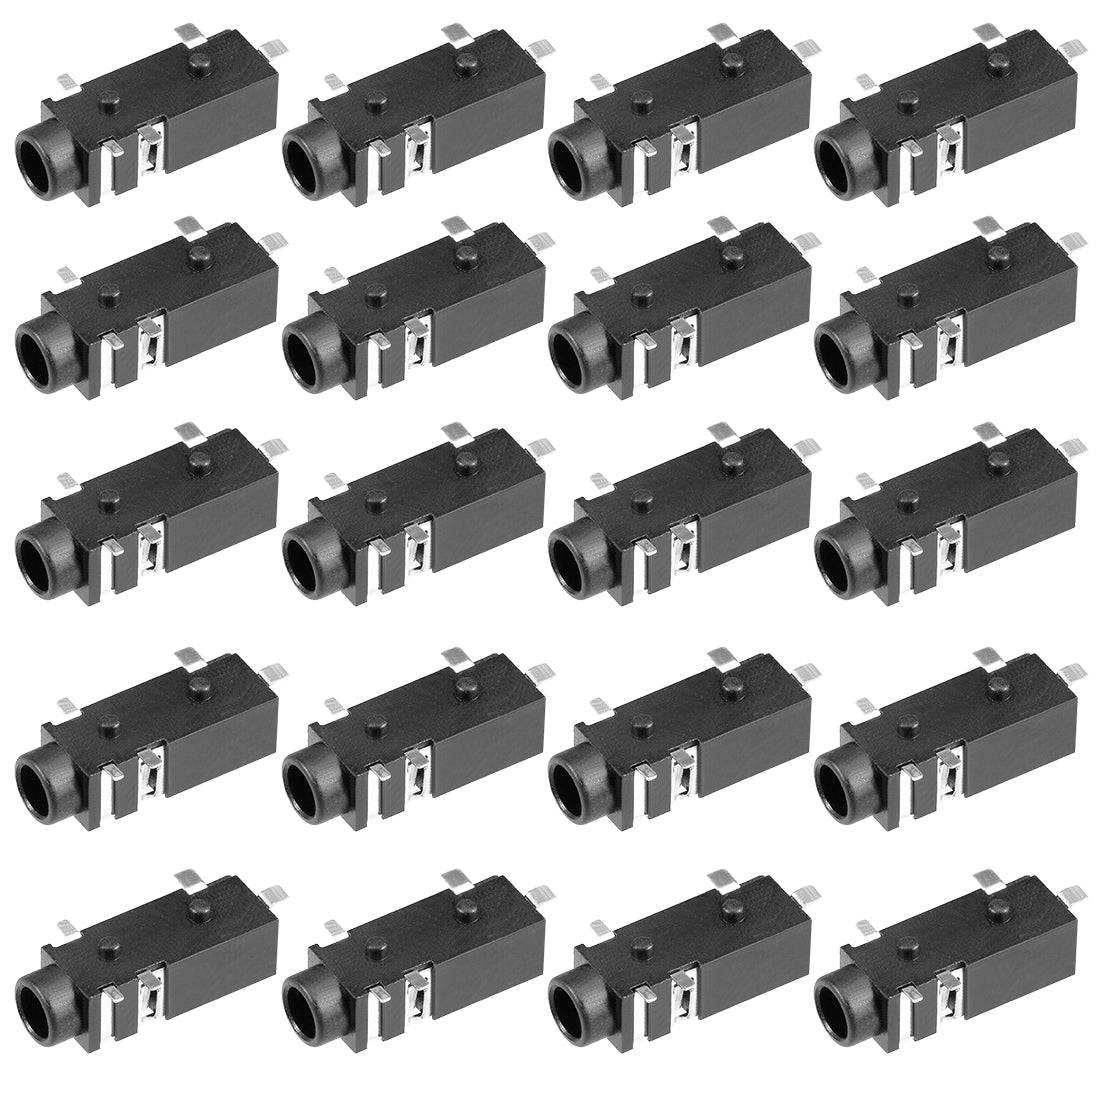 uxcell Uxcell 20Pcs PCB Mount 3.5mm 5 Pin Socket Headphone Stereo Jack Audio Video Connector Black PJ328